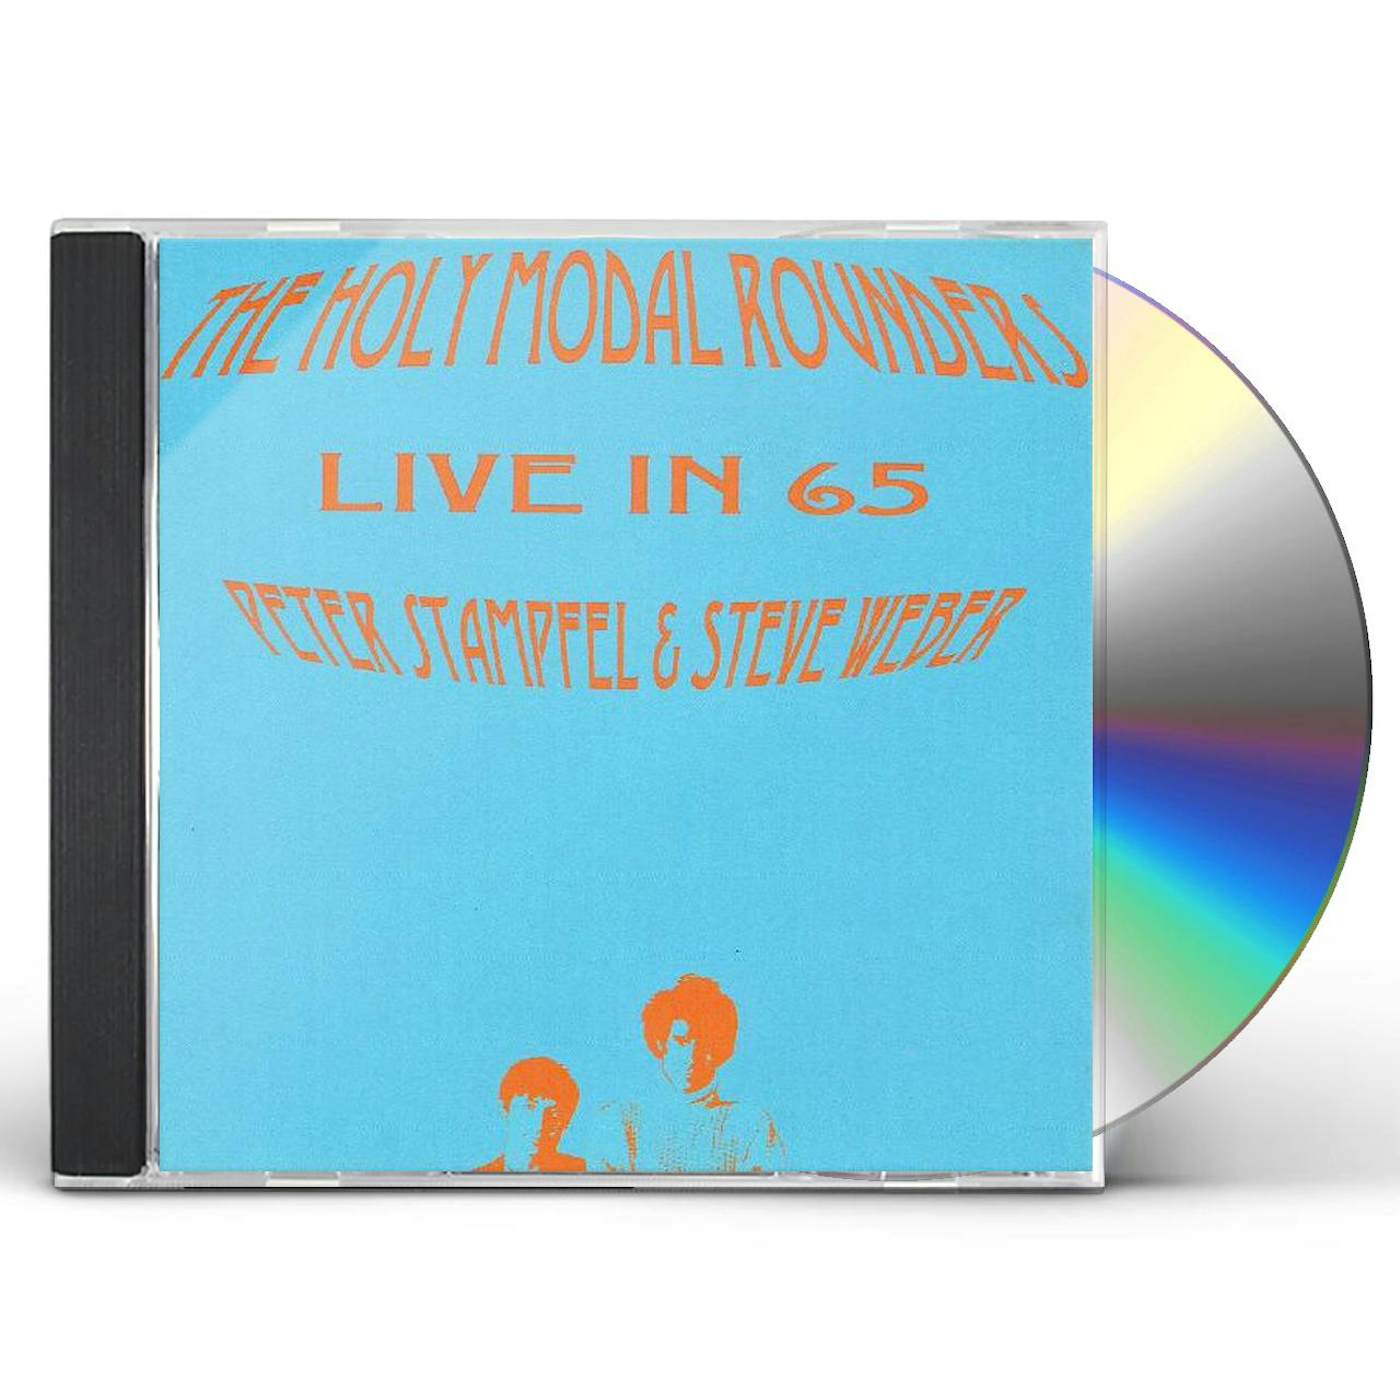 The Holy Modal Rounders LIVE IN 65 CD